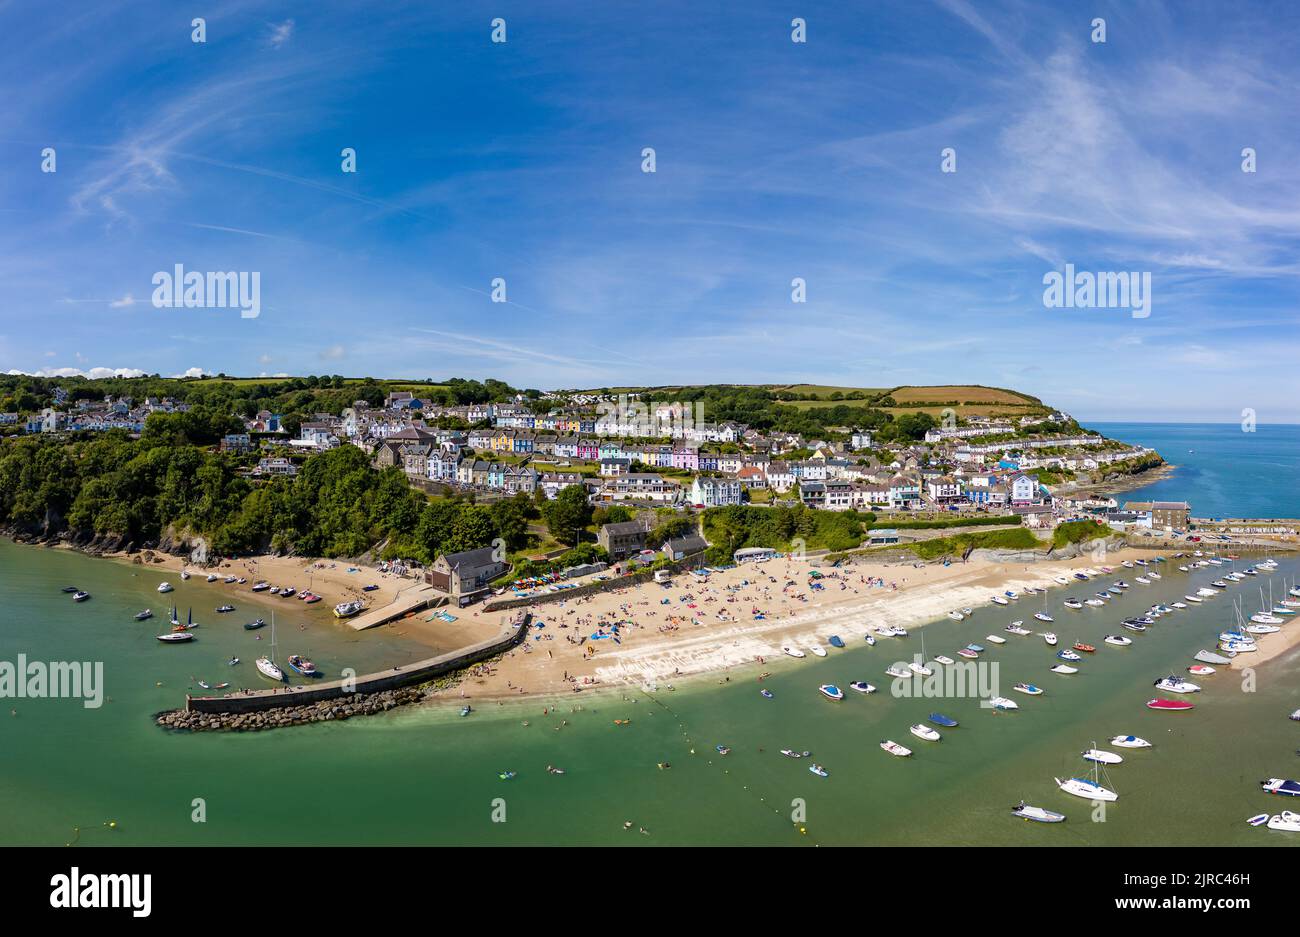 Panoramic view of the holiday resort town of New Quay on the West Wales coast in mid summer (Cardigan Bay) Stock Photo